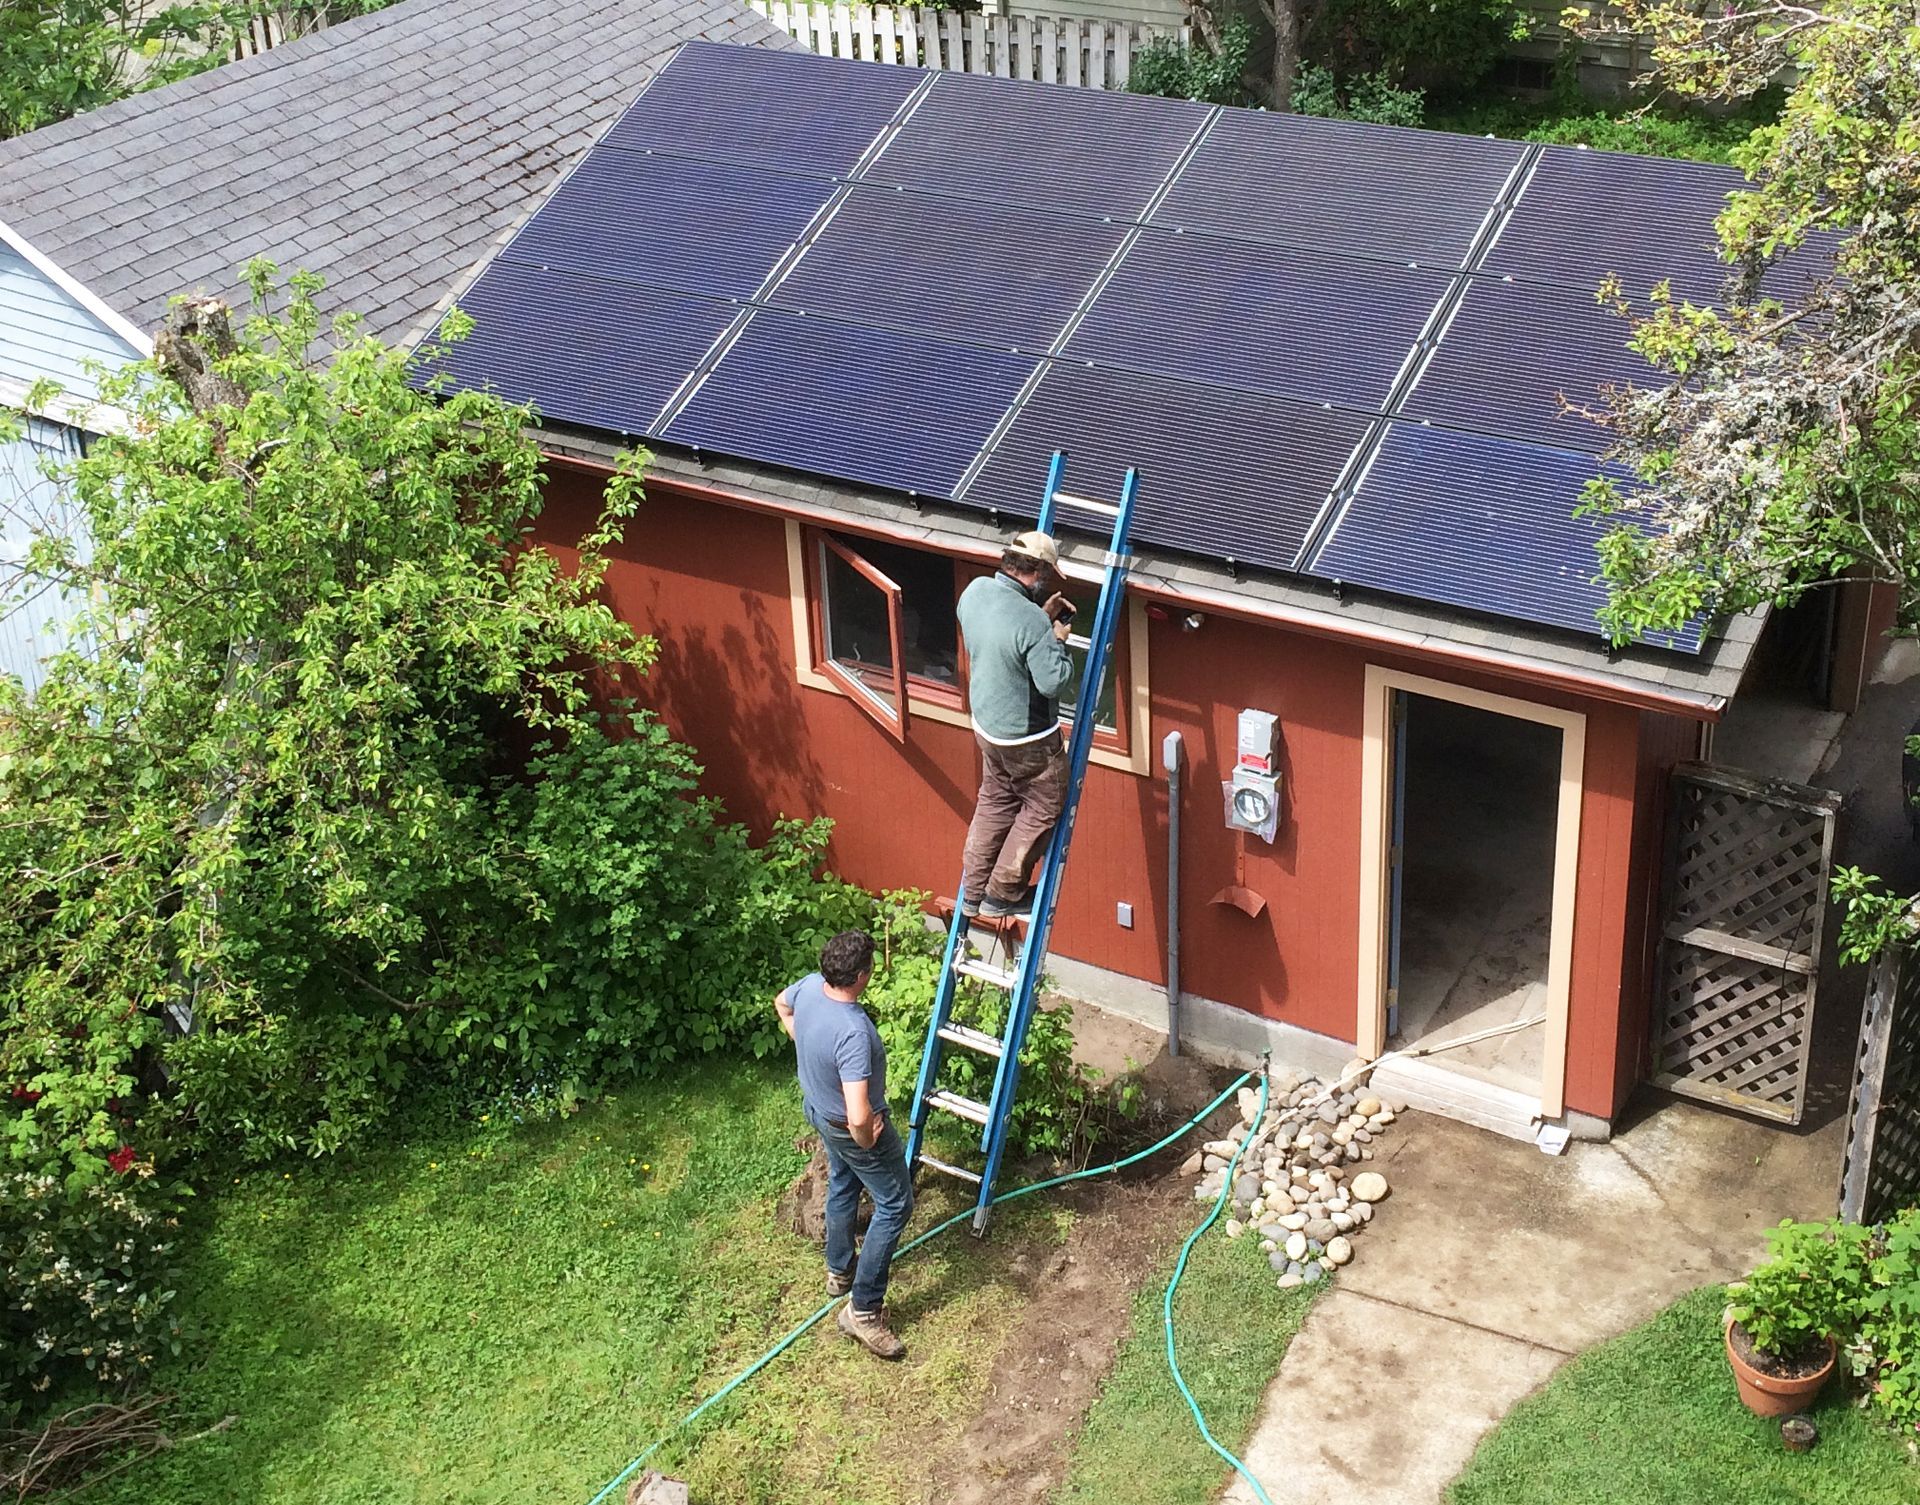 Solar panel installation on shed roof in Puyallup, Washington.